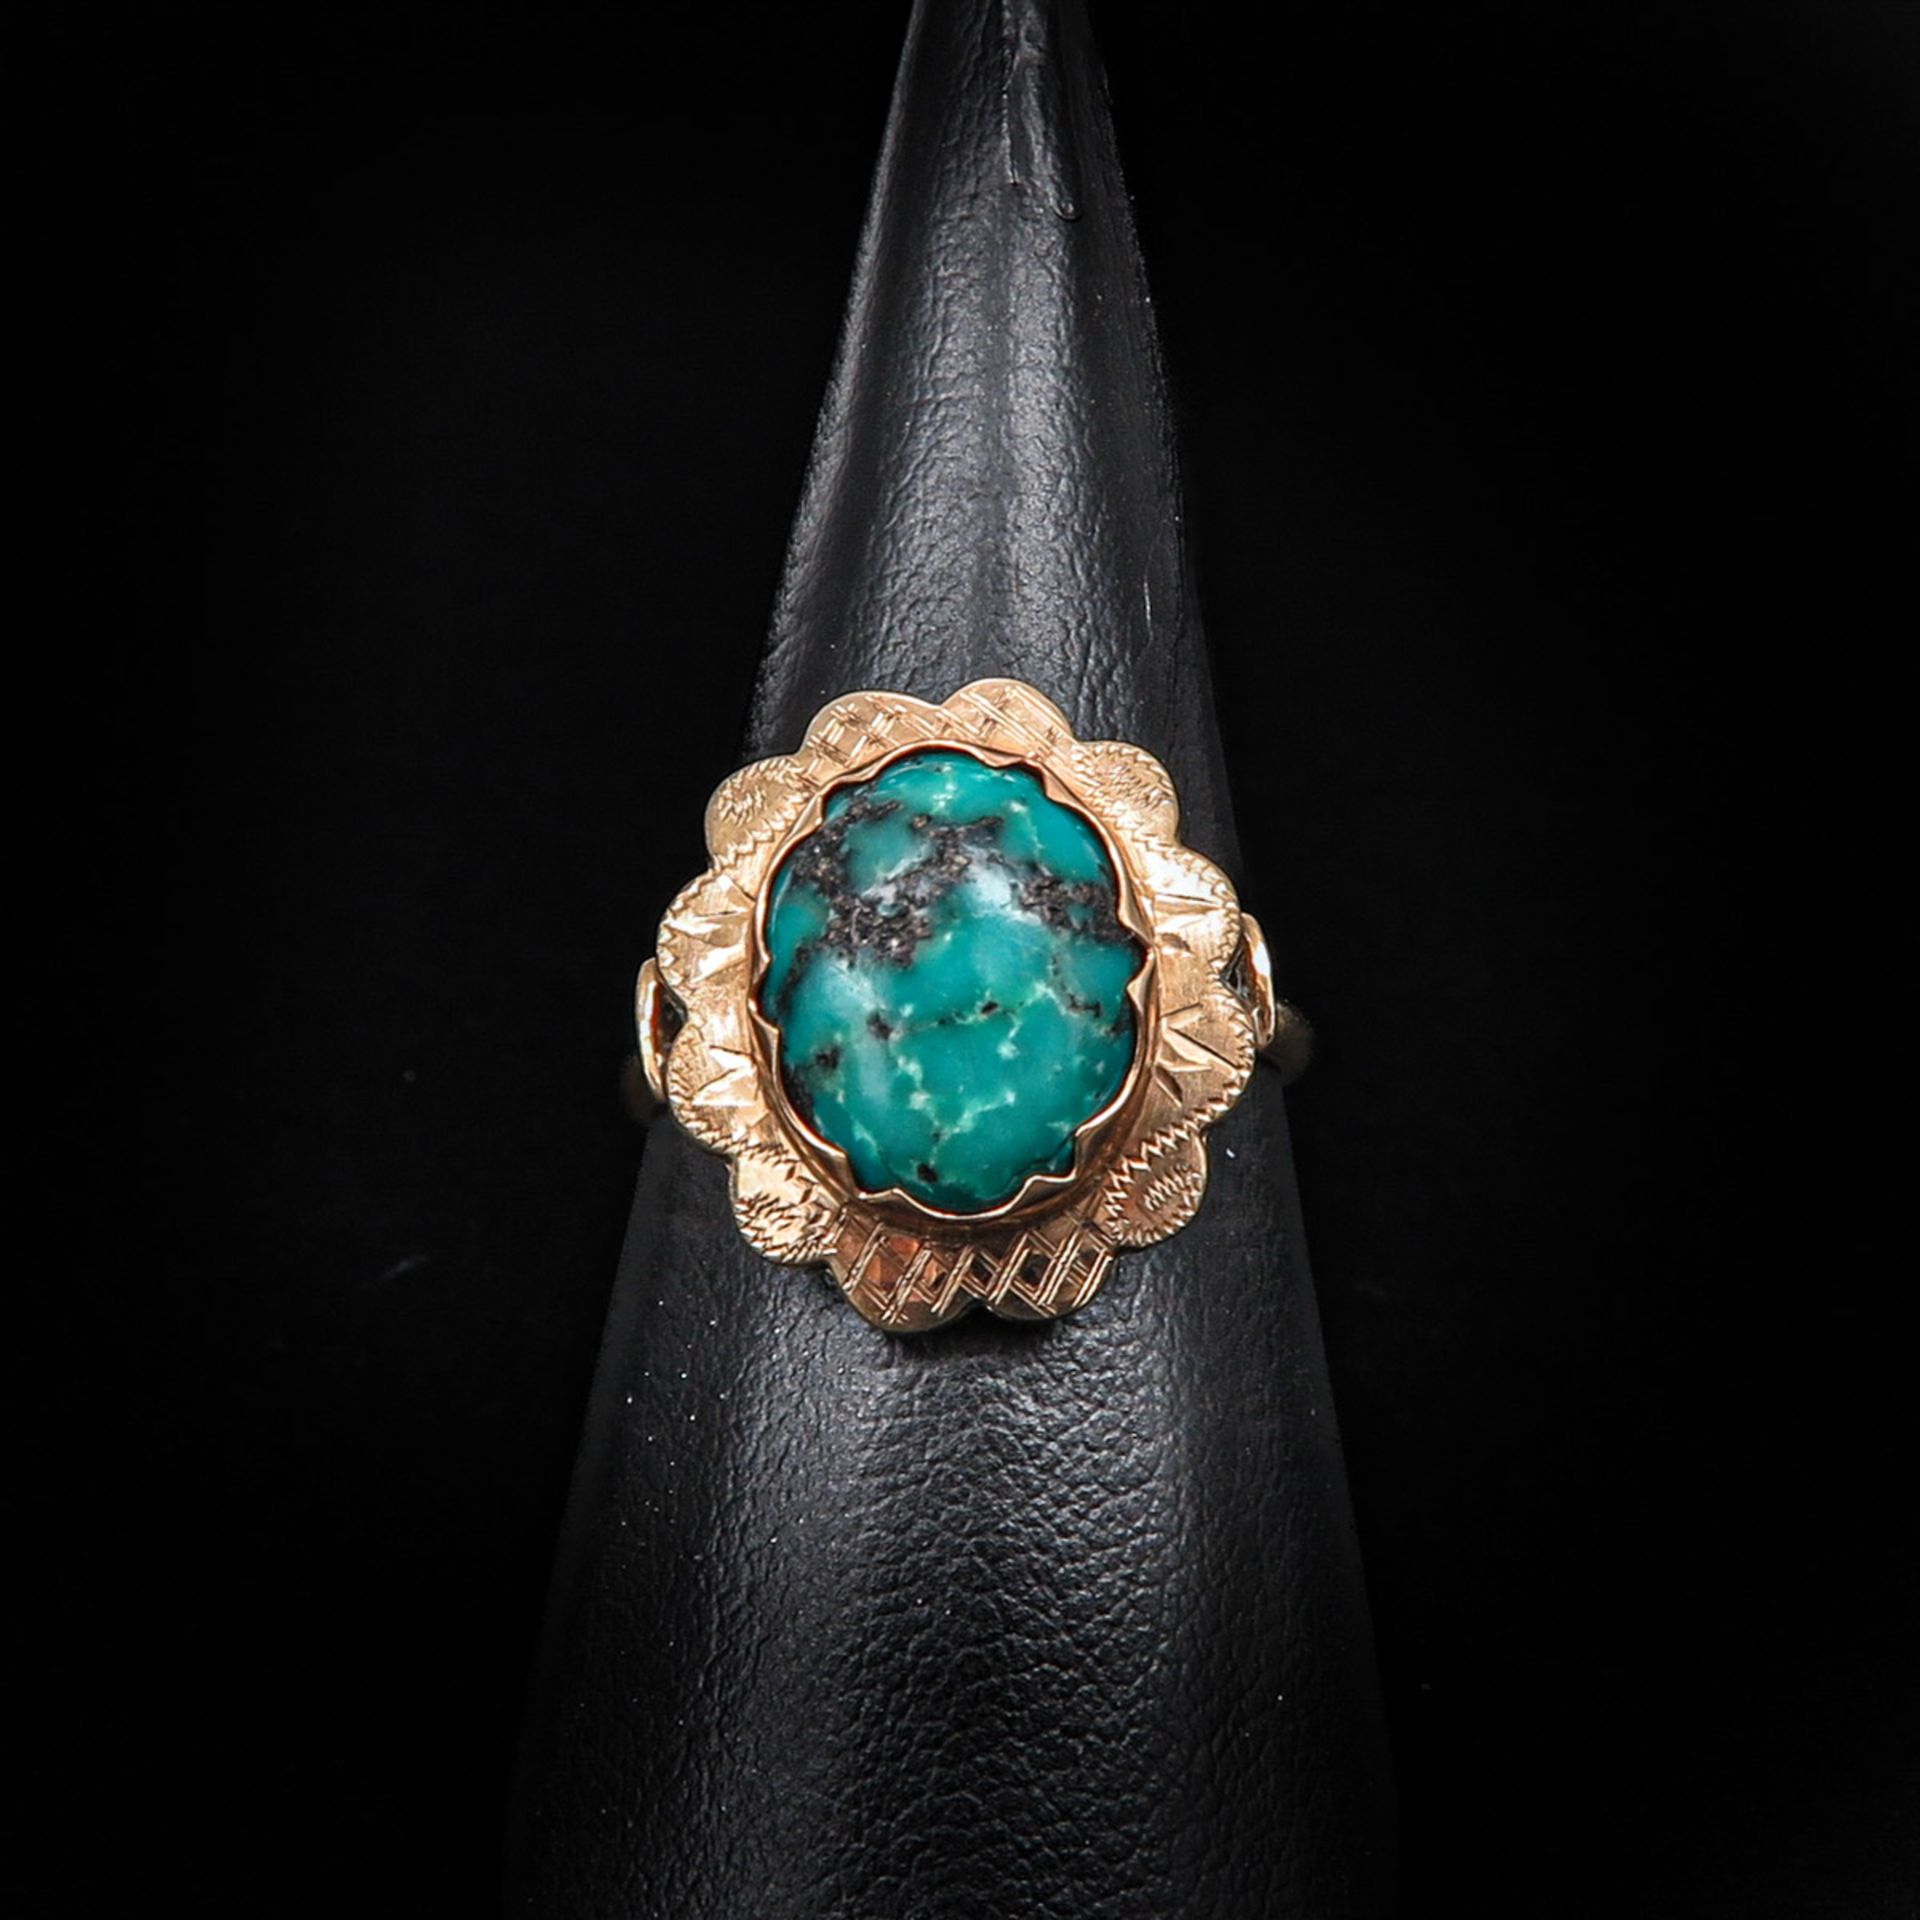 A Turquoise Necklace and Ring along with a Garnet Necklace and Ring - Bild 4 aus 7